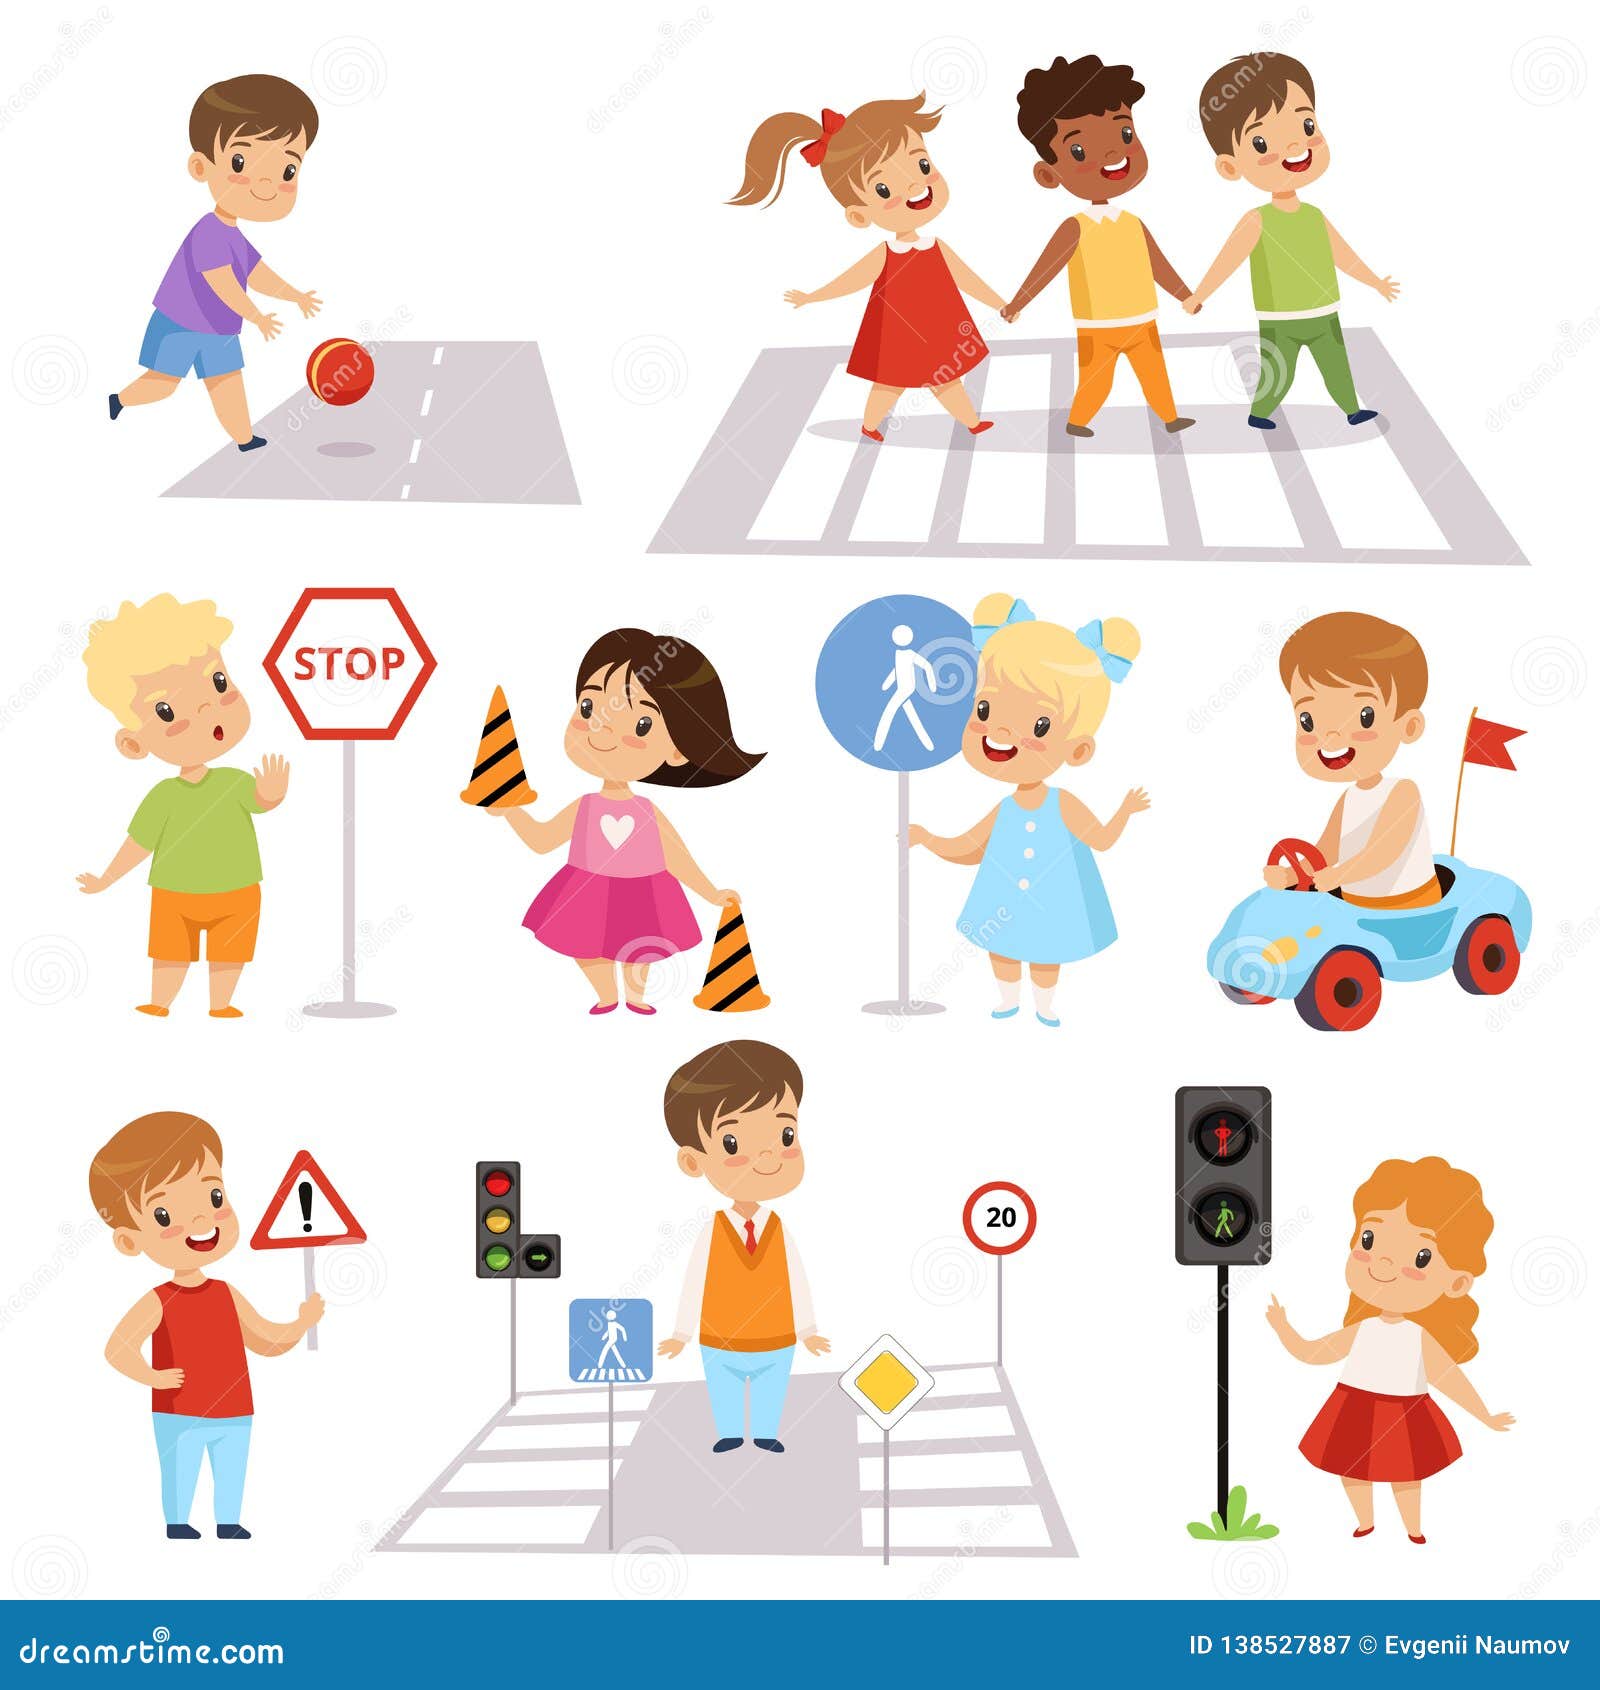 Teaching traffic rules for kids for their safety and road mannerism